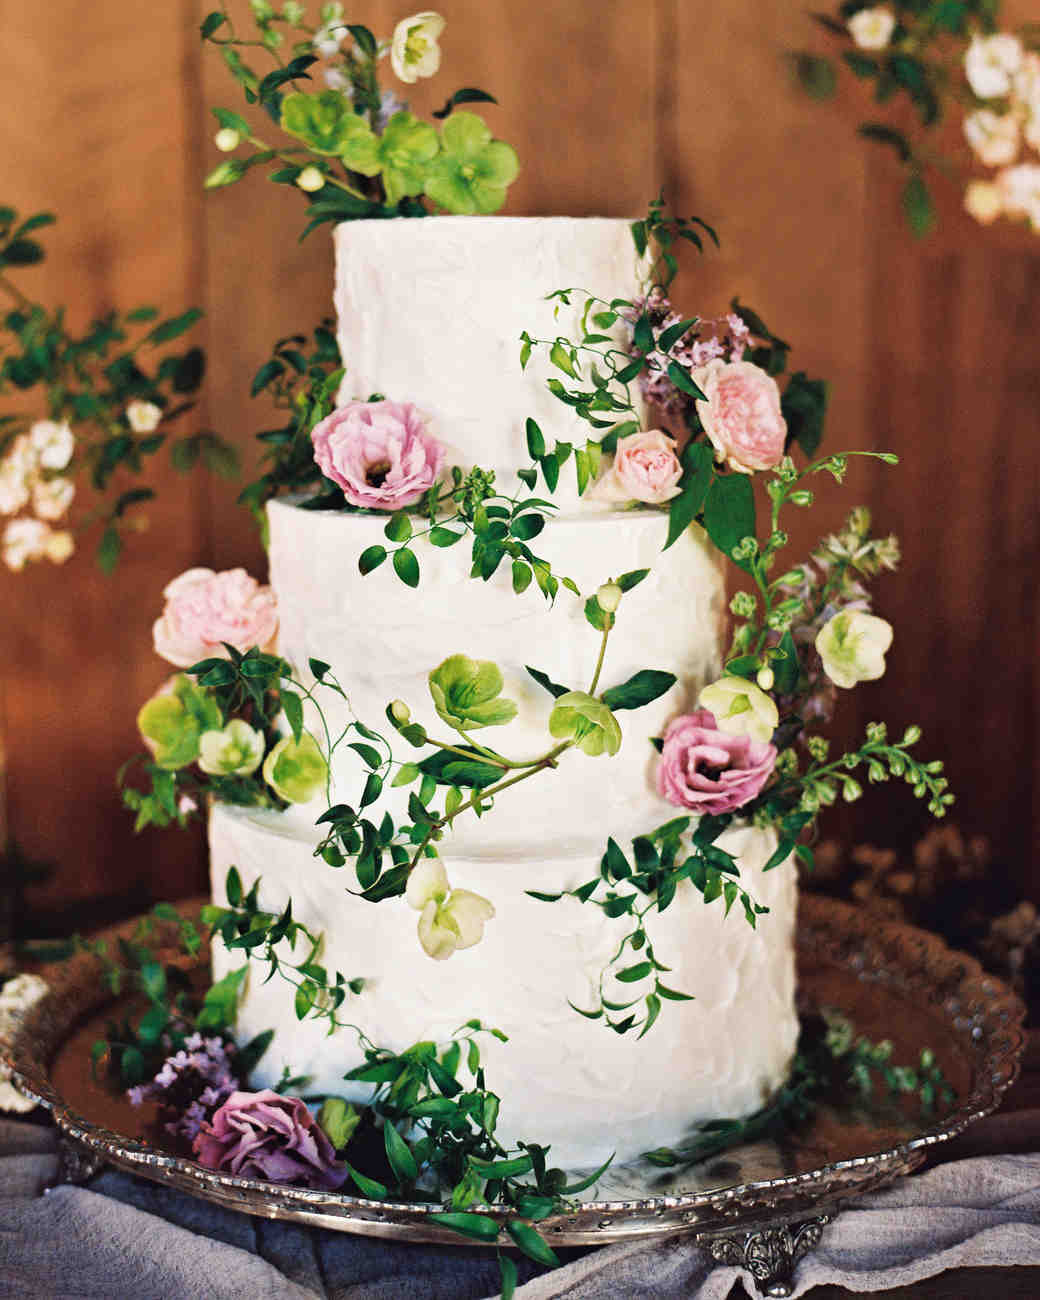 Floral Wedding Cakes
 44 Wedding Cakes with Fresh Flowers